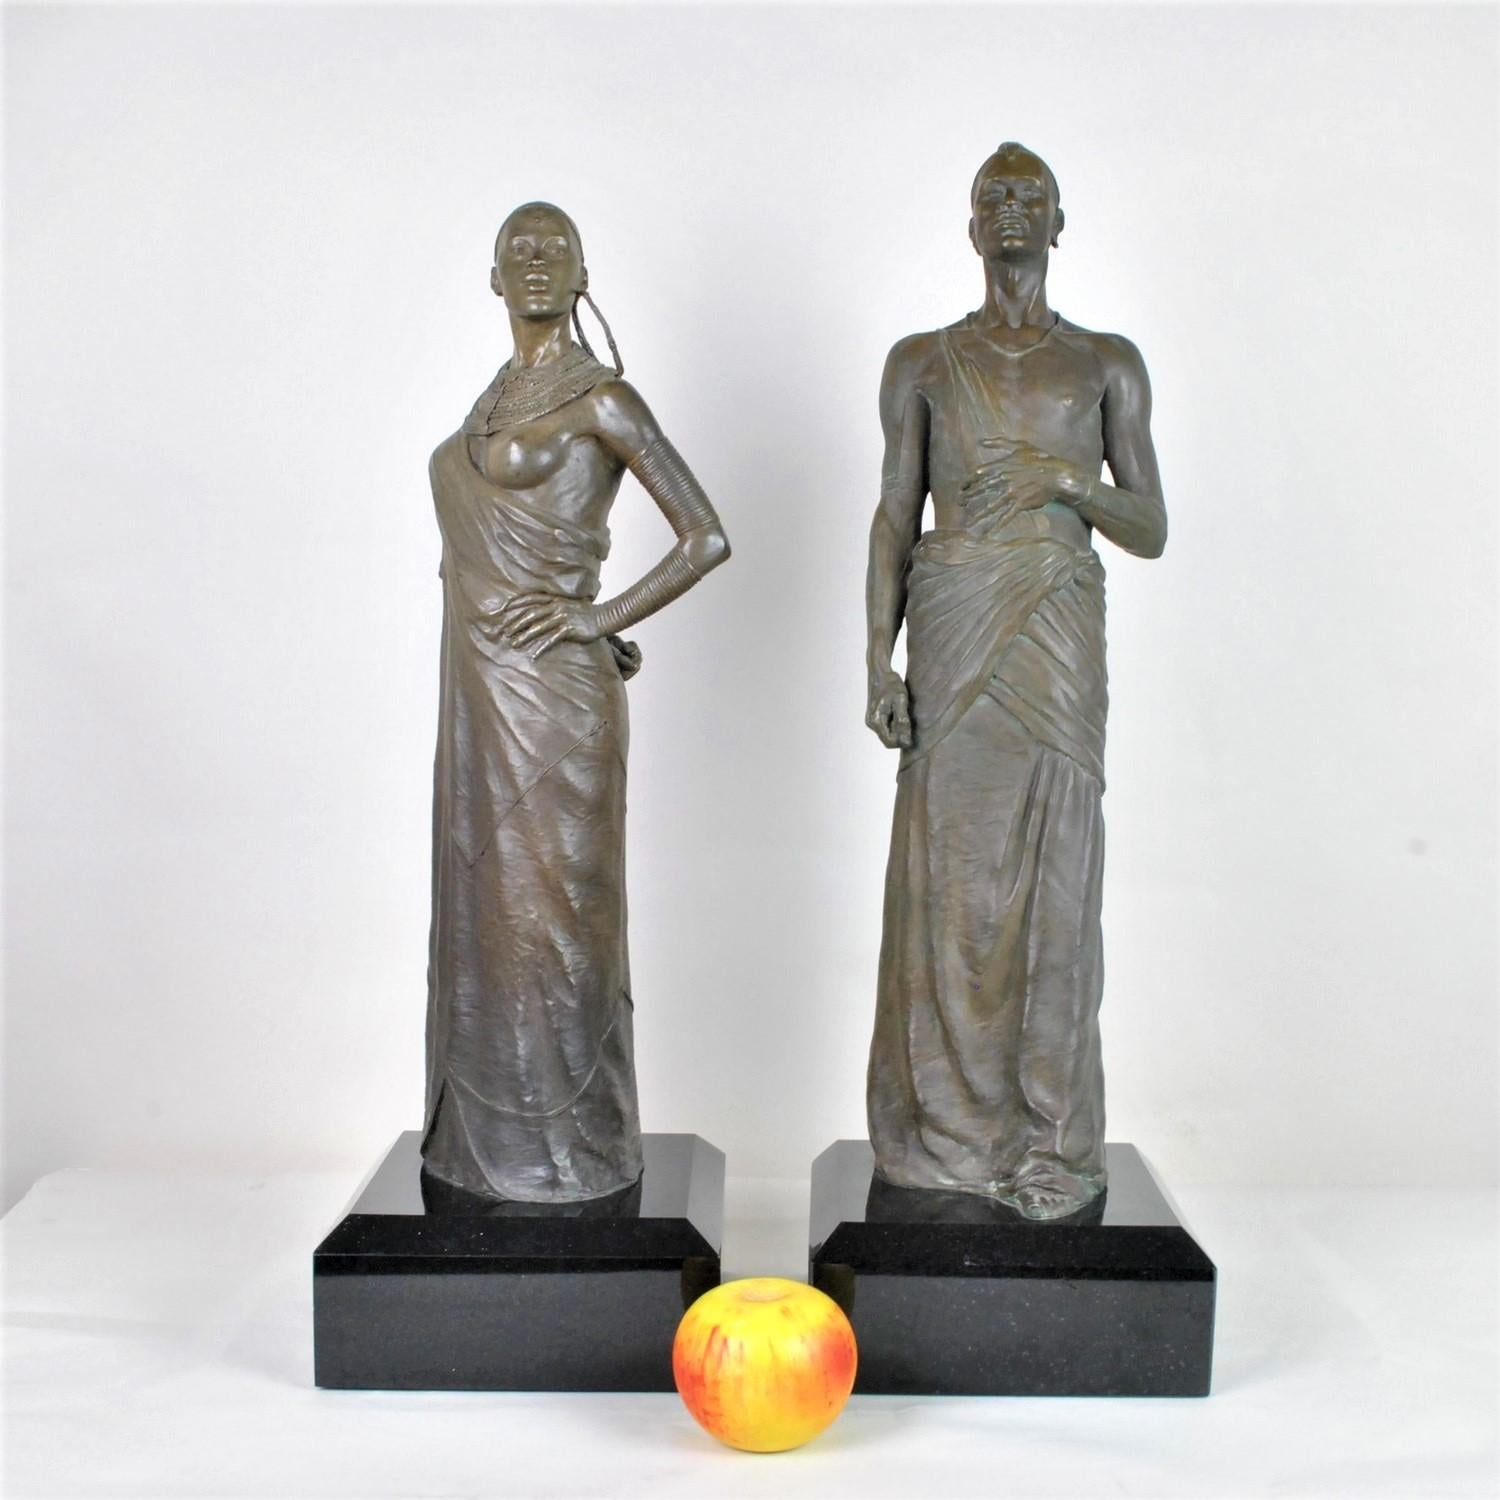 Large bronze pair with brown patina, representing a Maasai couple: very good quality cast iron, with many details in the jewelry, the hairstyles and especially the muscles and veins that stand out on the arms.

Bronzes signed both, but